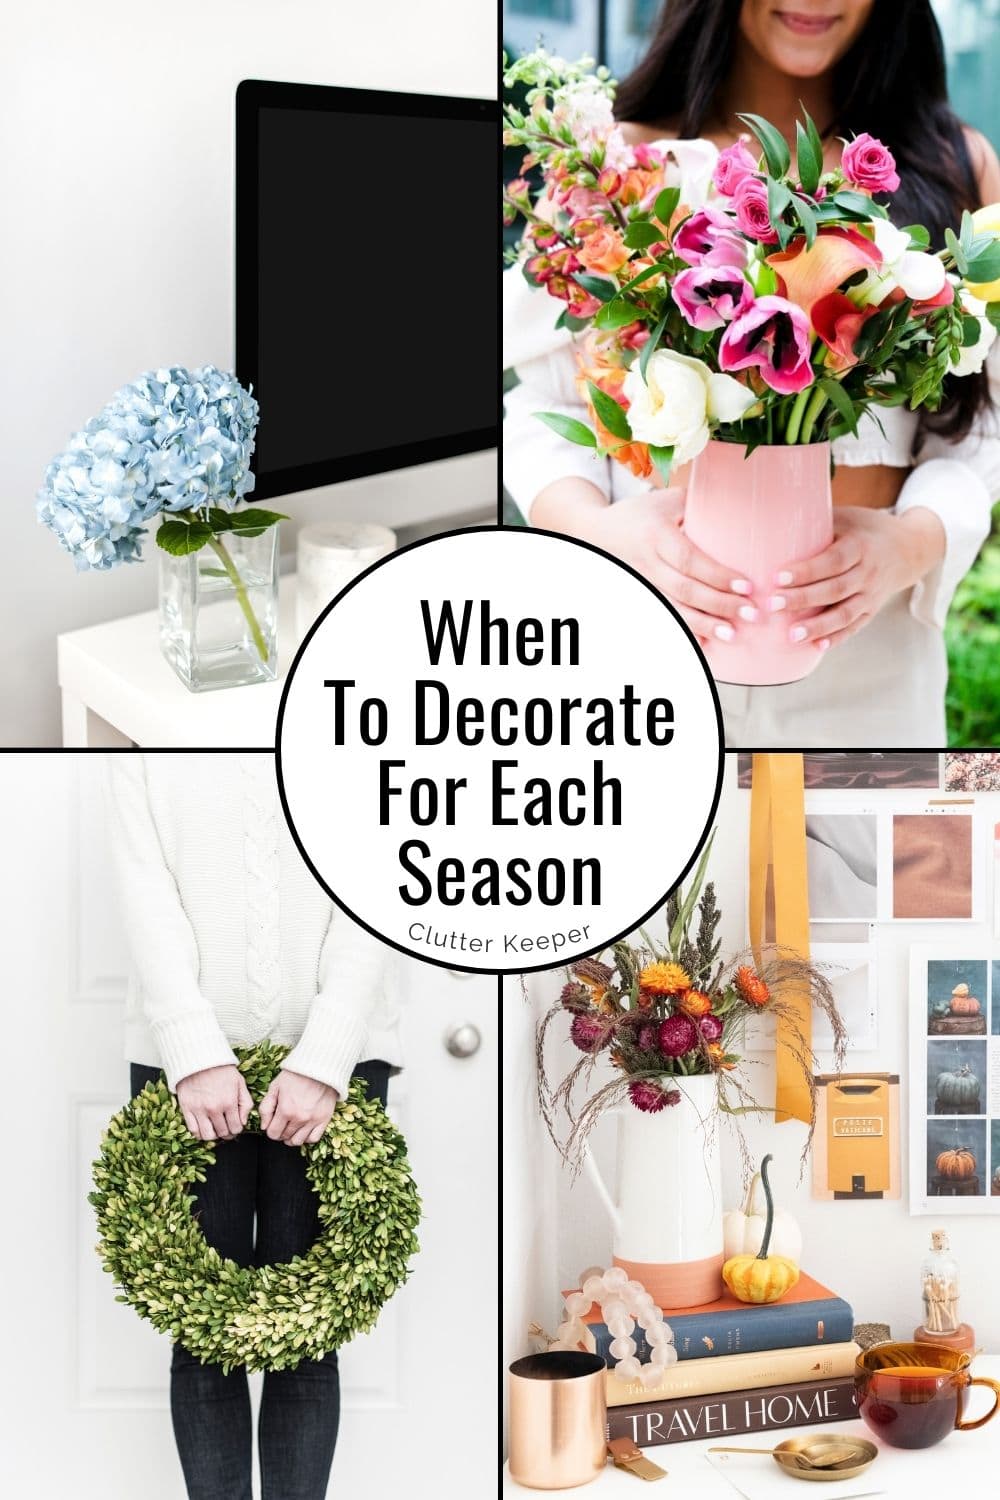 When to decorate for each season.